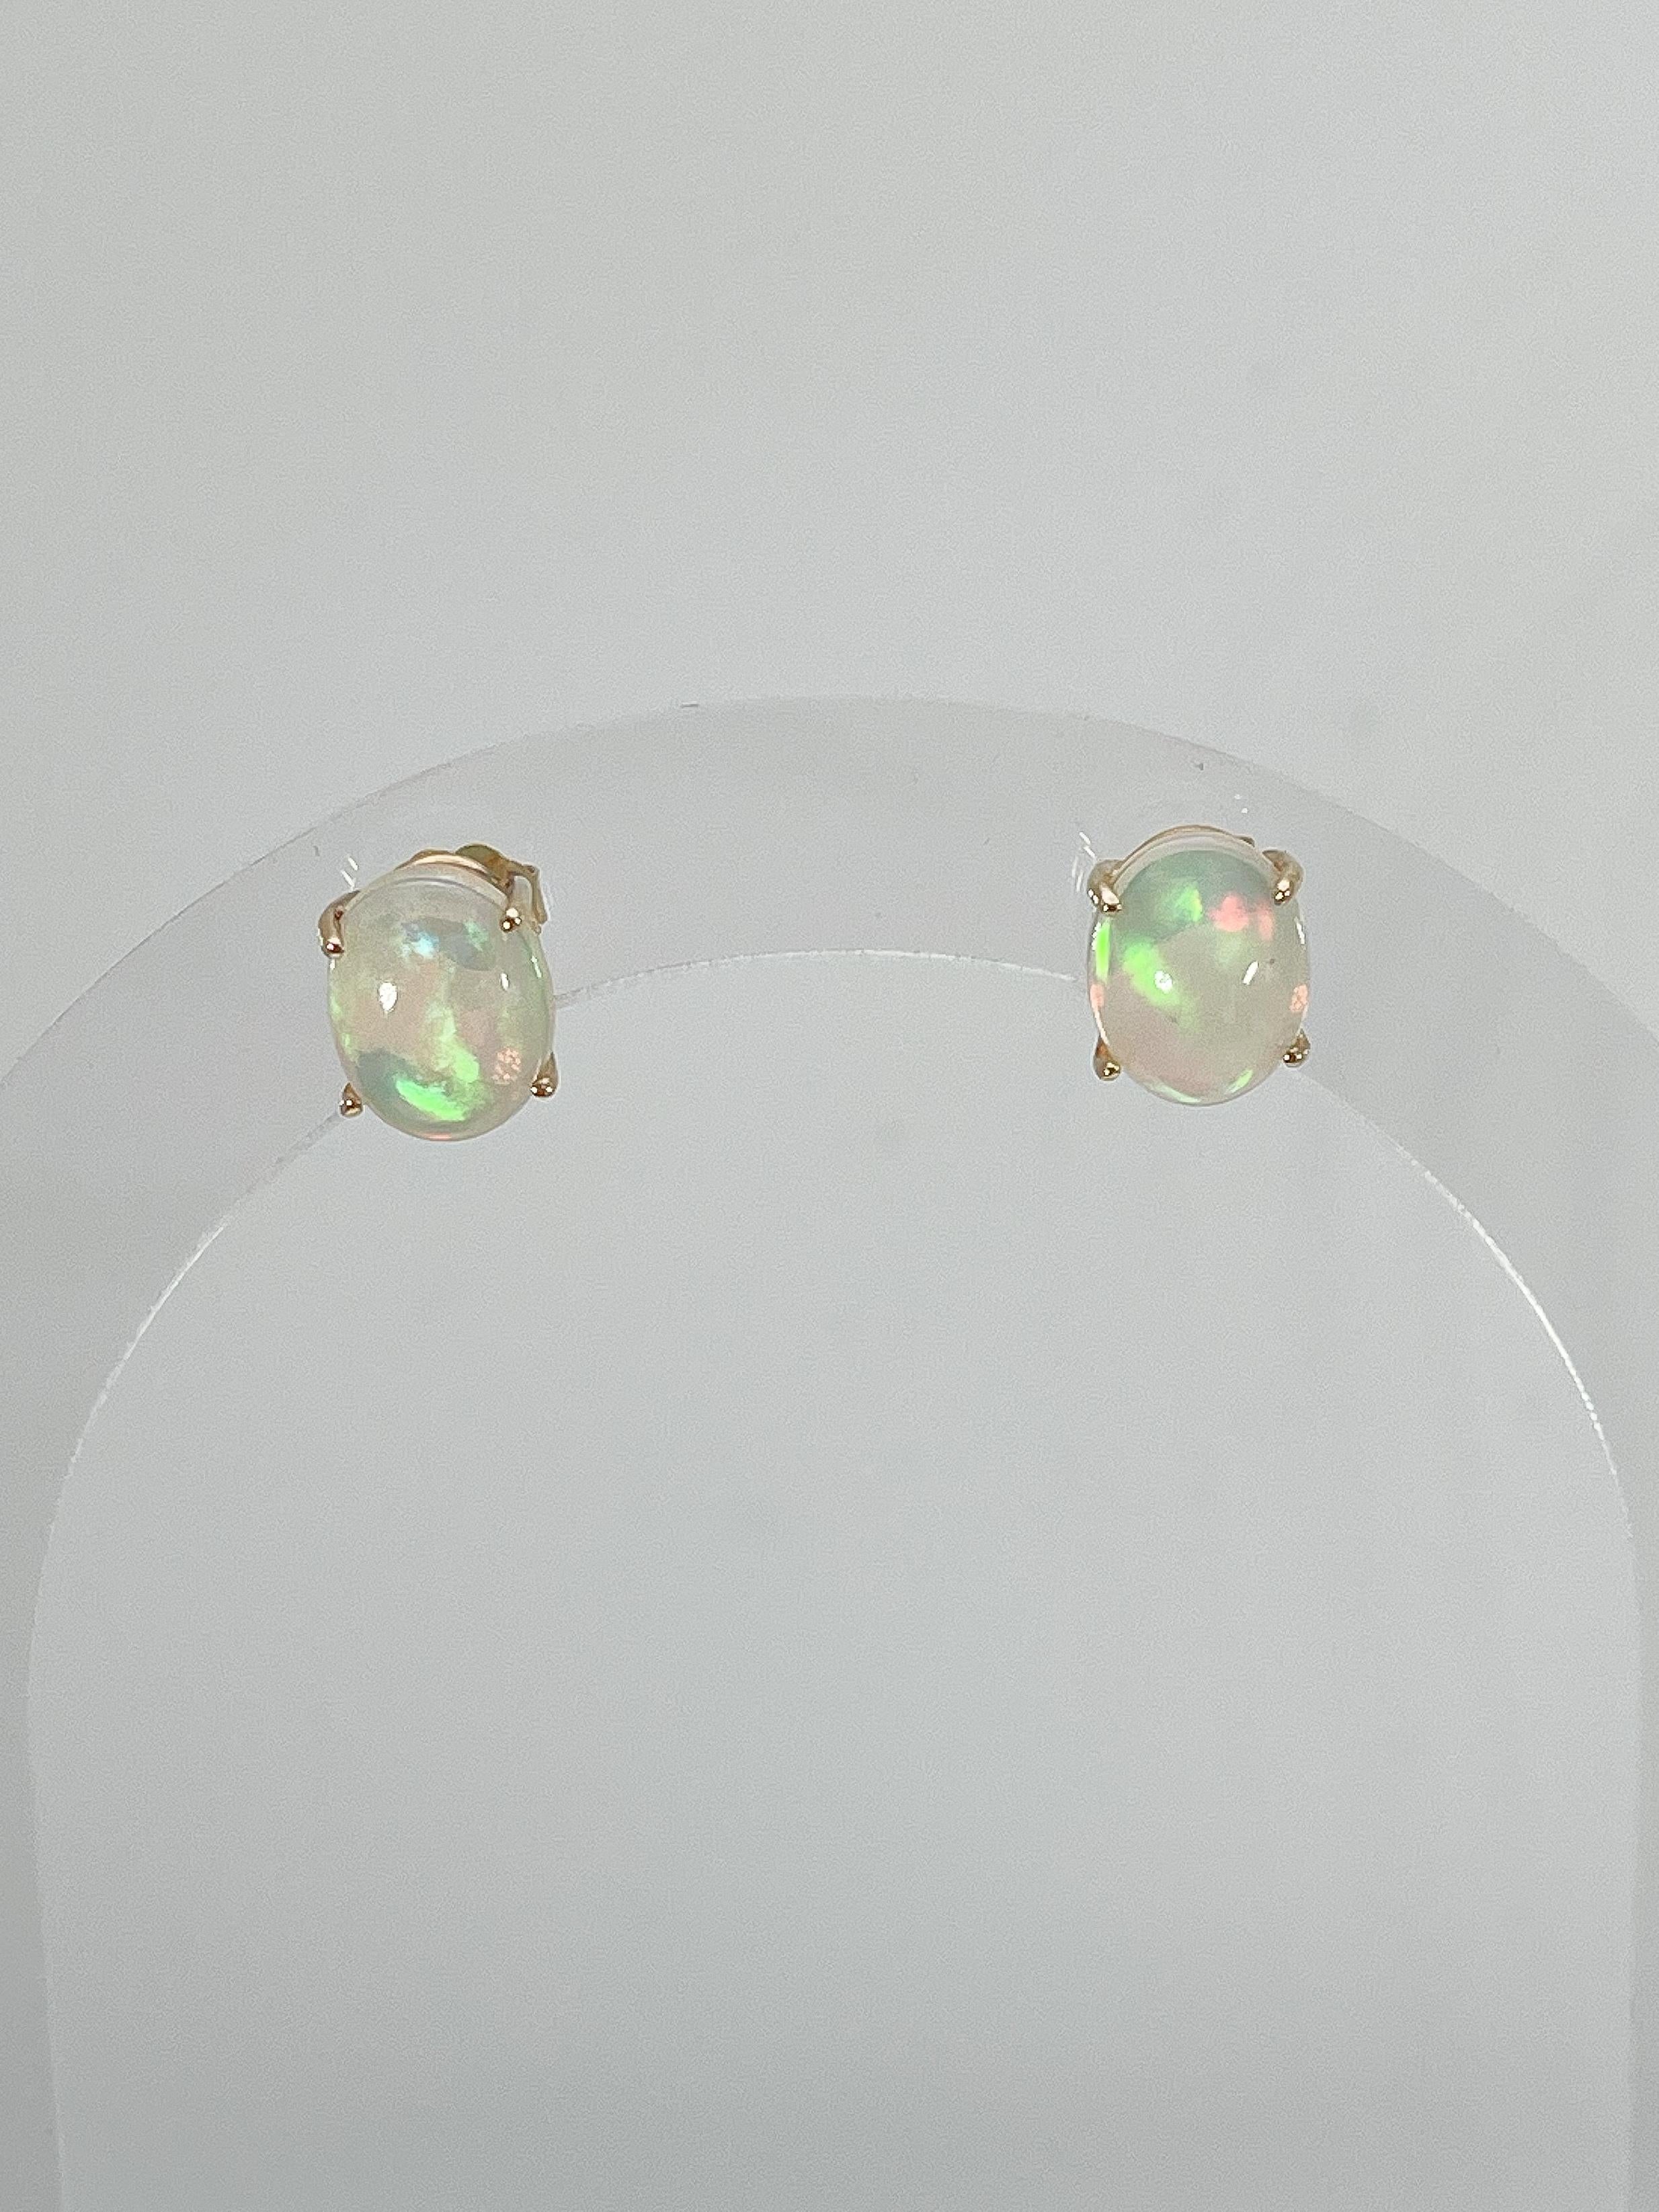 14k yellow gold oval opal stud earrings. These earrings have a measurement of 10 x 8 mm, and they have a total weight of 2.06 grams.